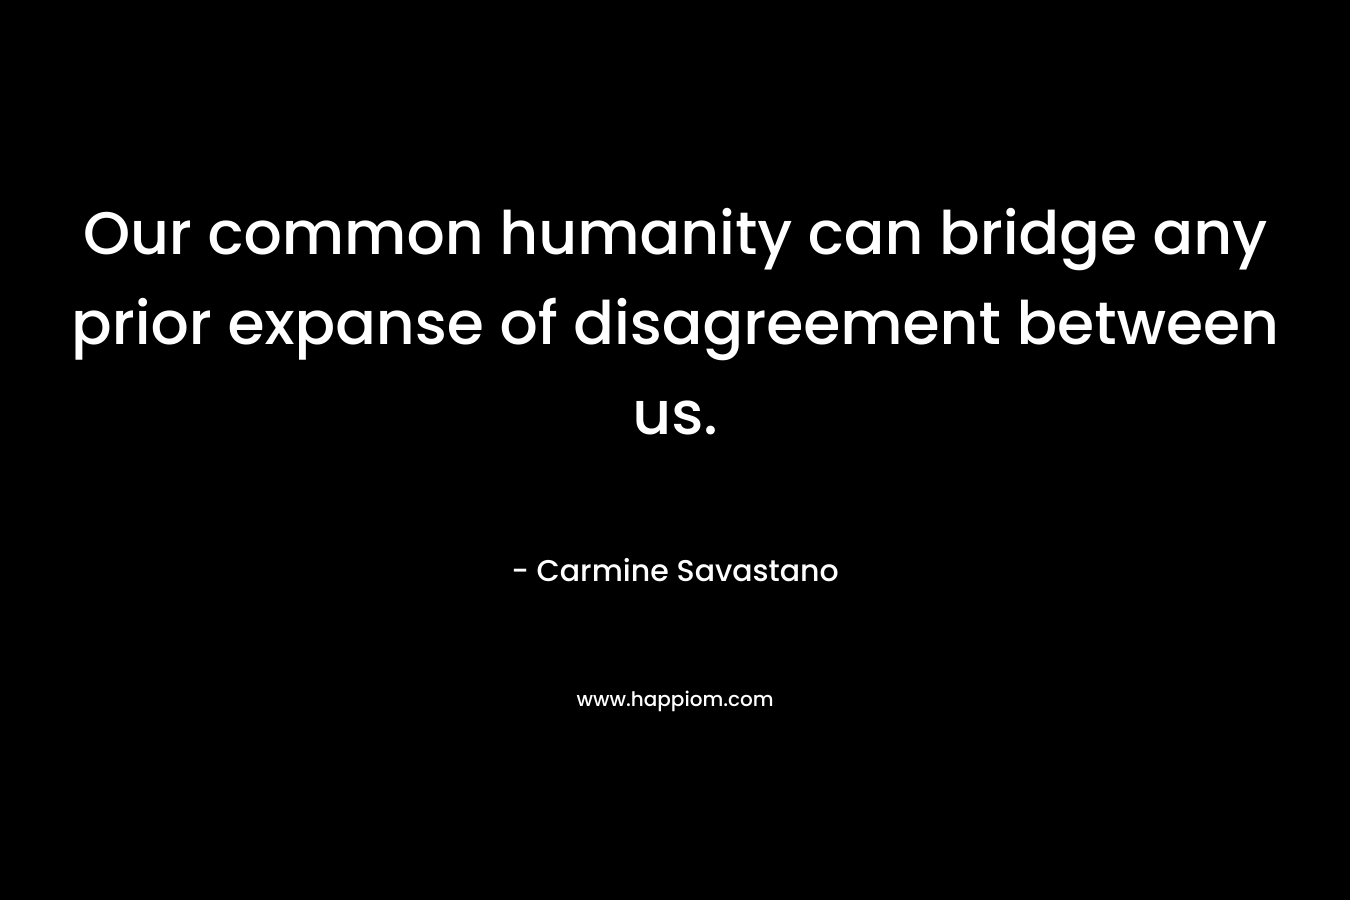 Our common humanity can bridge any prior expanse of disagreement between us.